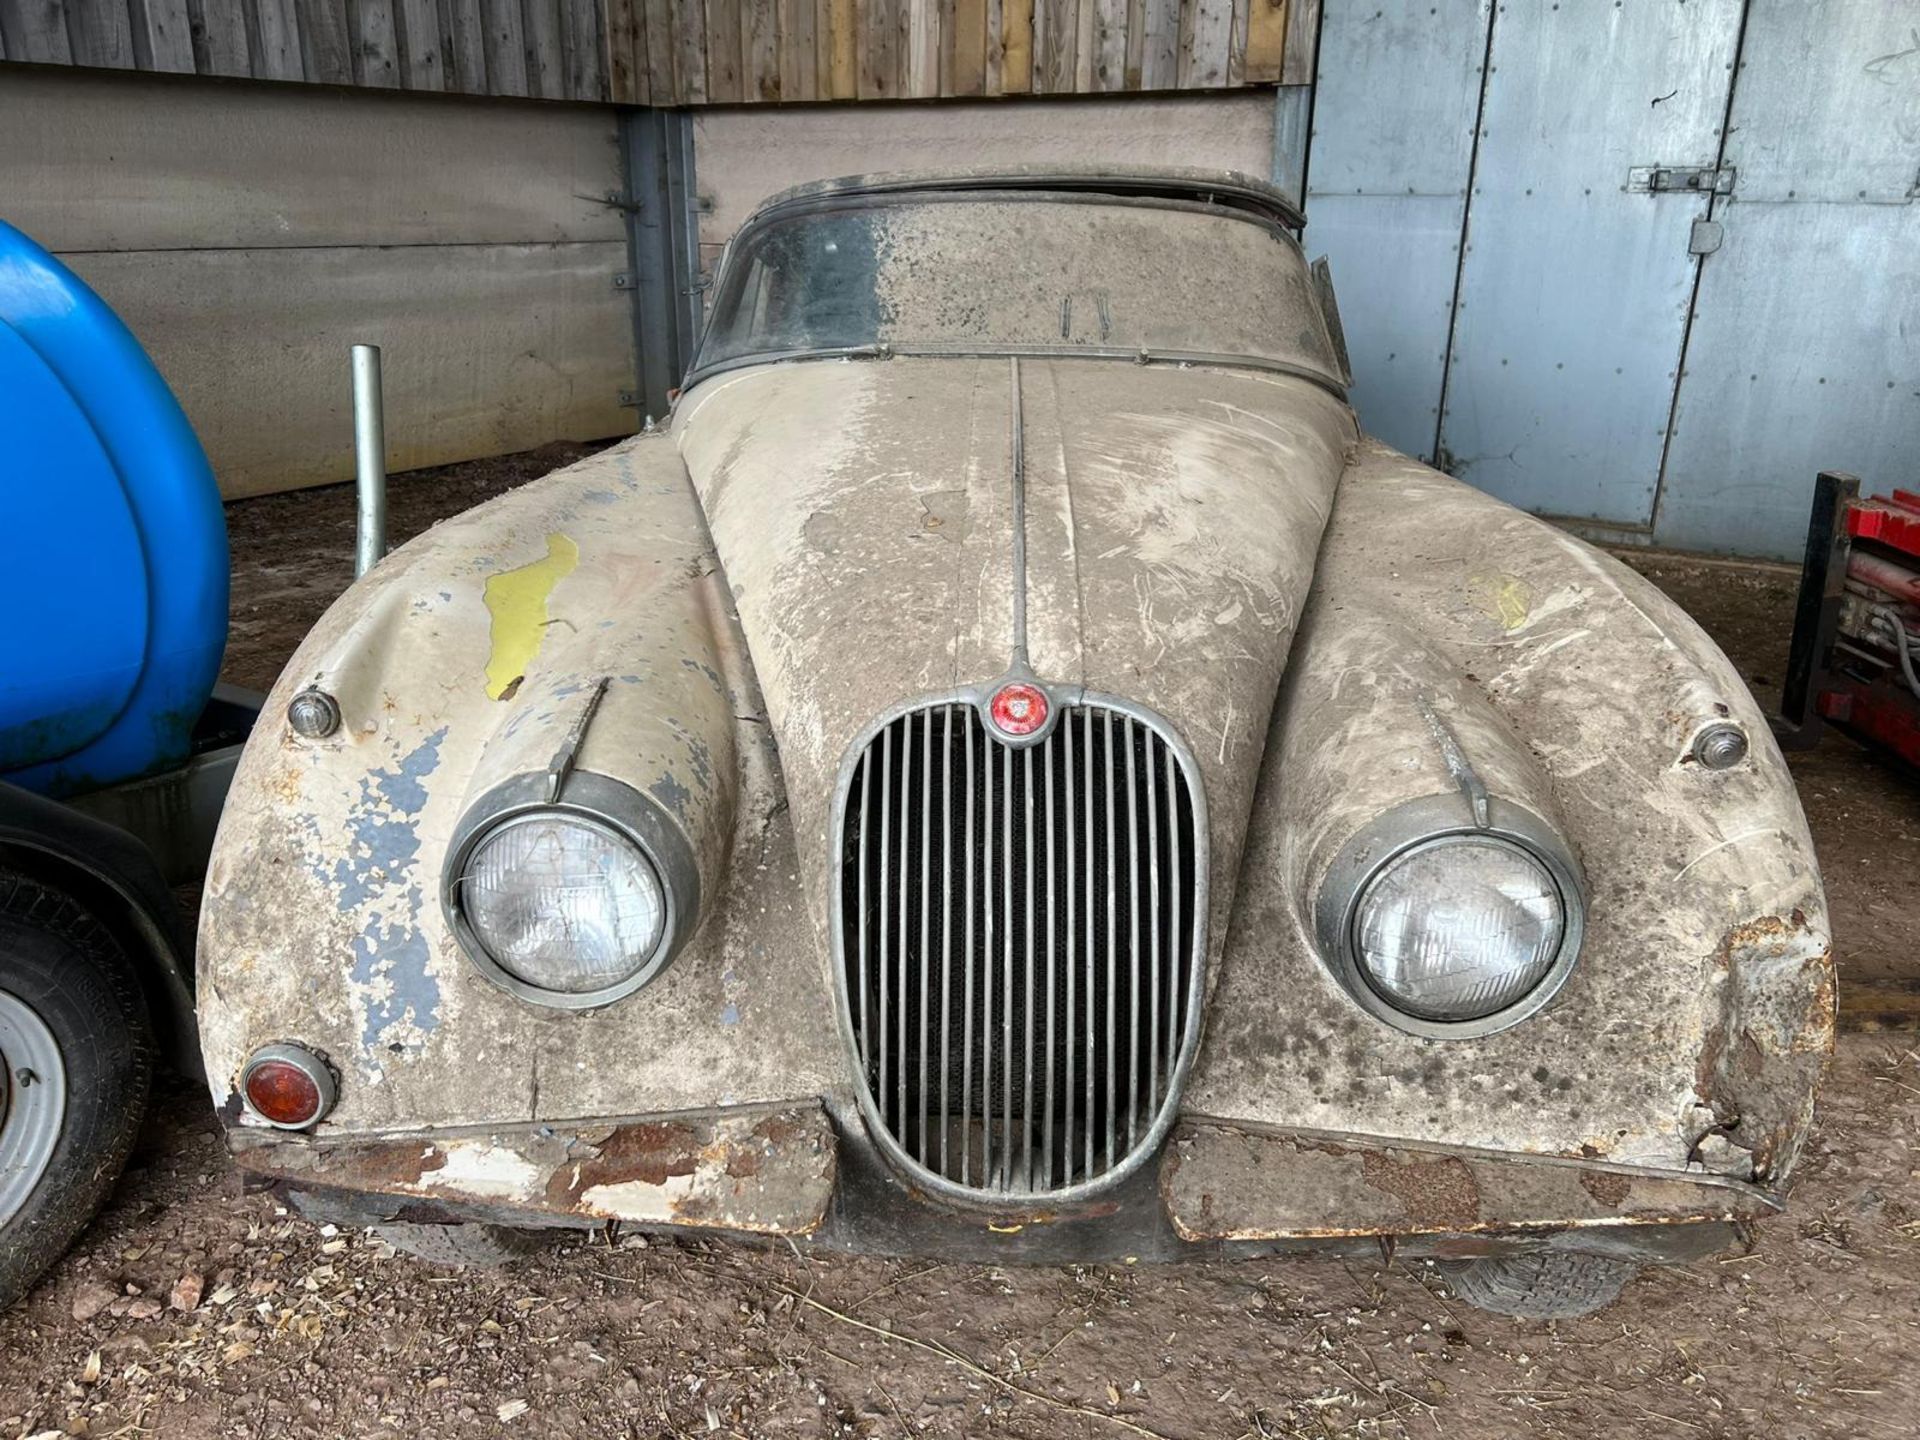 Jaguar XK150 3.4 Drop Head Coupe 1958 Barn Find. Matching numbers. - Image 9 of 30